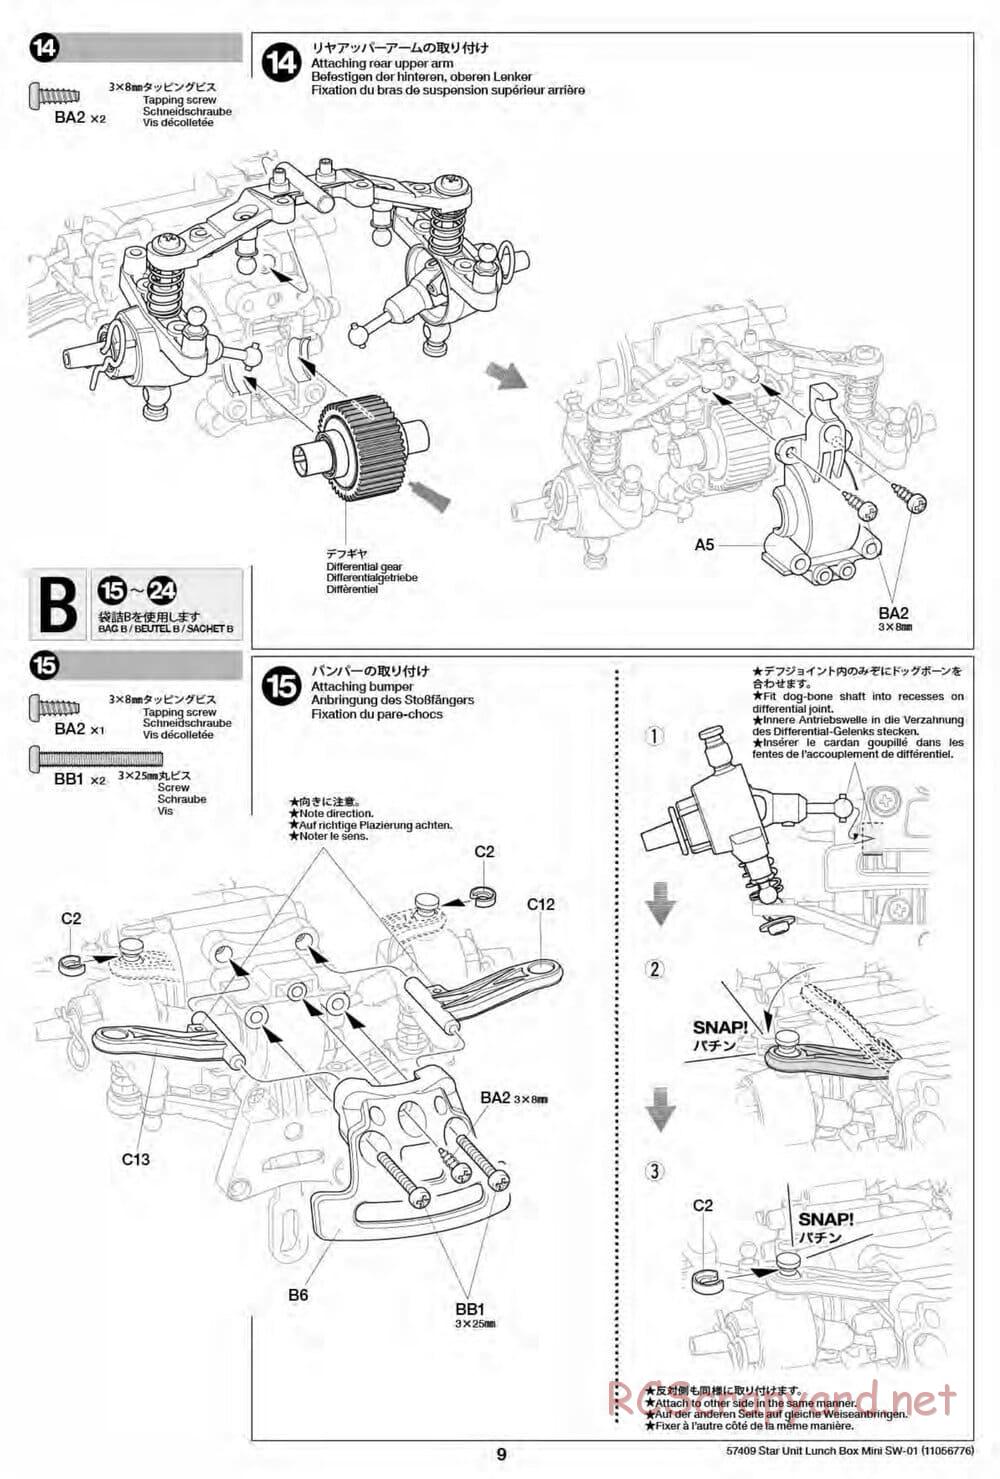 Tamiya - Lunch Box Mini - SW-01 Chassis - Manual - Page 9